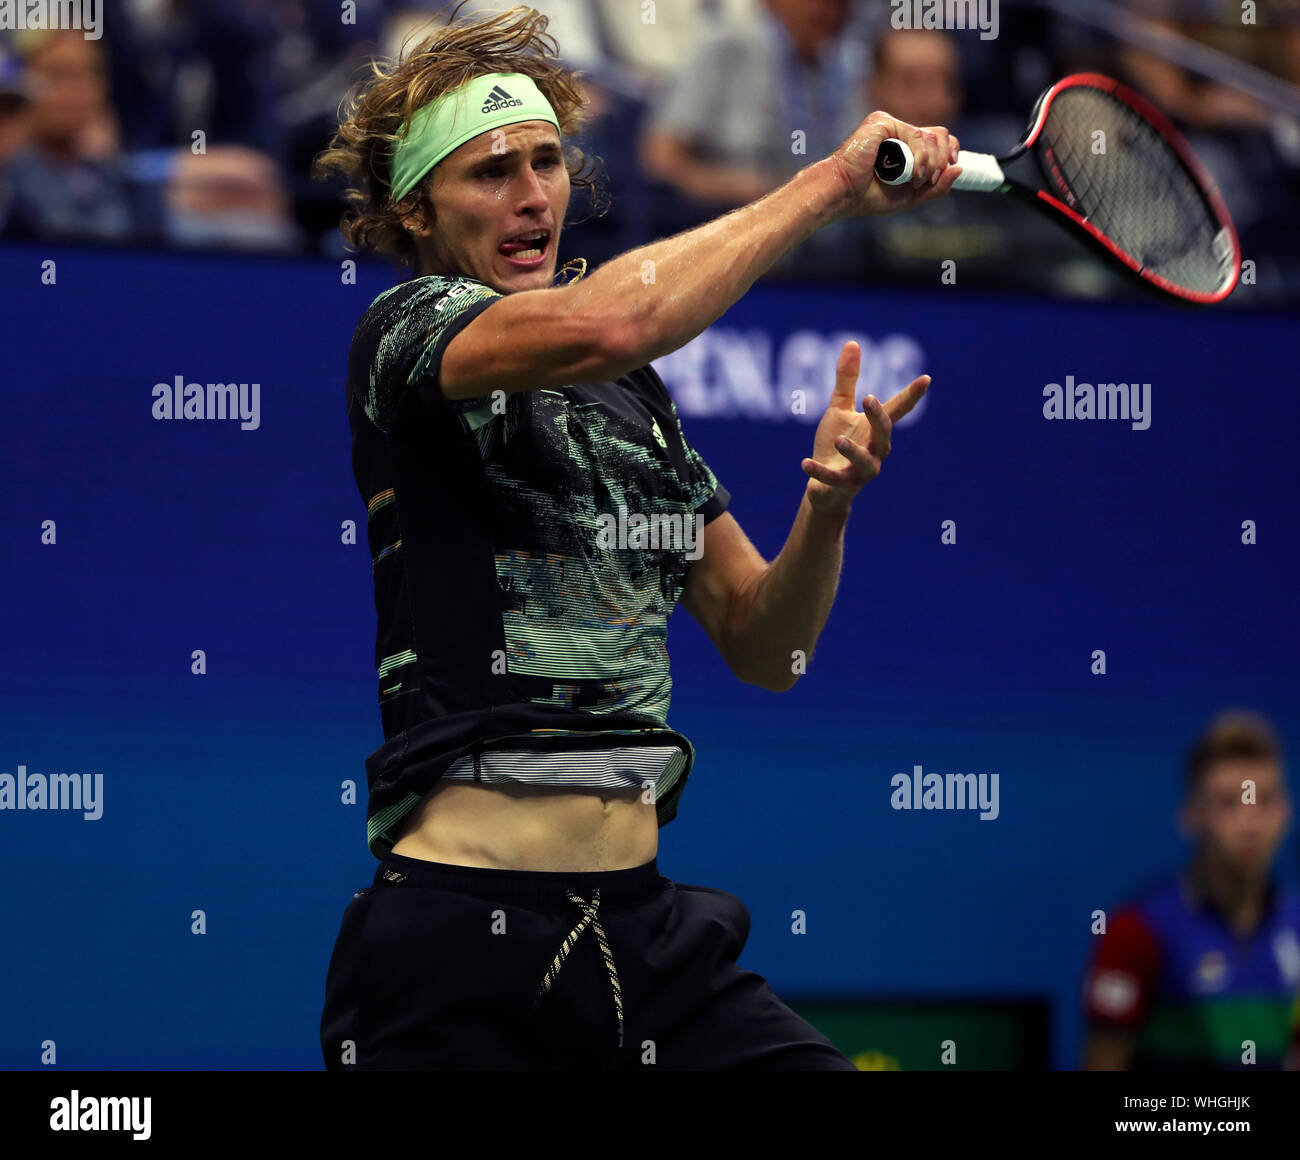 New York, United States. 02nd Sep, 2019. Flushing Meadows, New York, United States - September 2, 2019. Number 6 seed Alexander Zverev of Germany returns a shot during his fourth round match against Diego Schwartzman of Argentina at the US Open today. Credit: Adam Stoltman/Alamy Live News Stock Photo